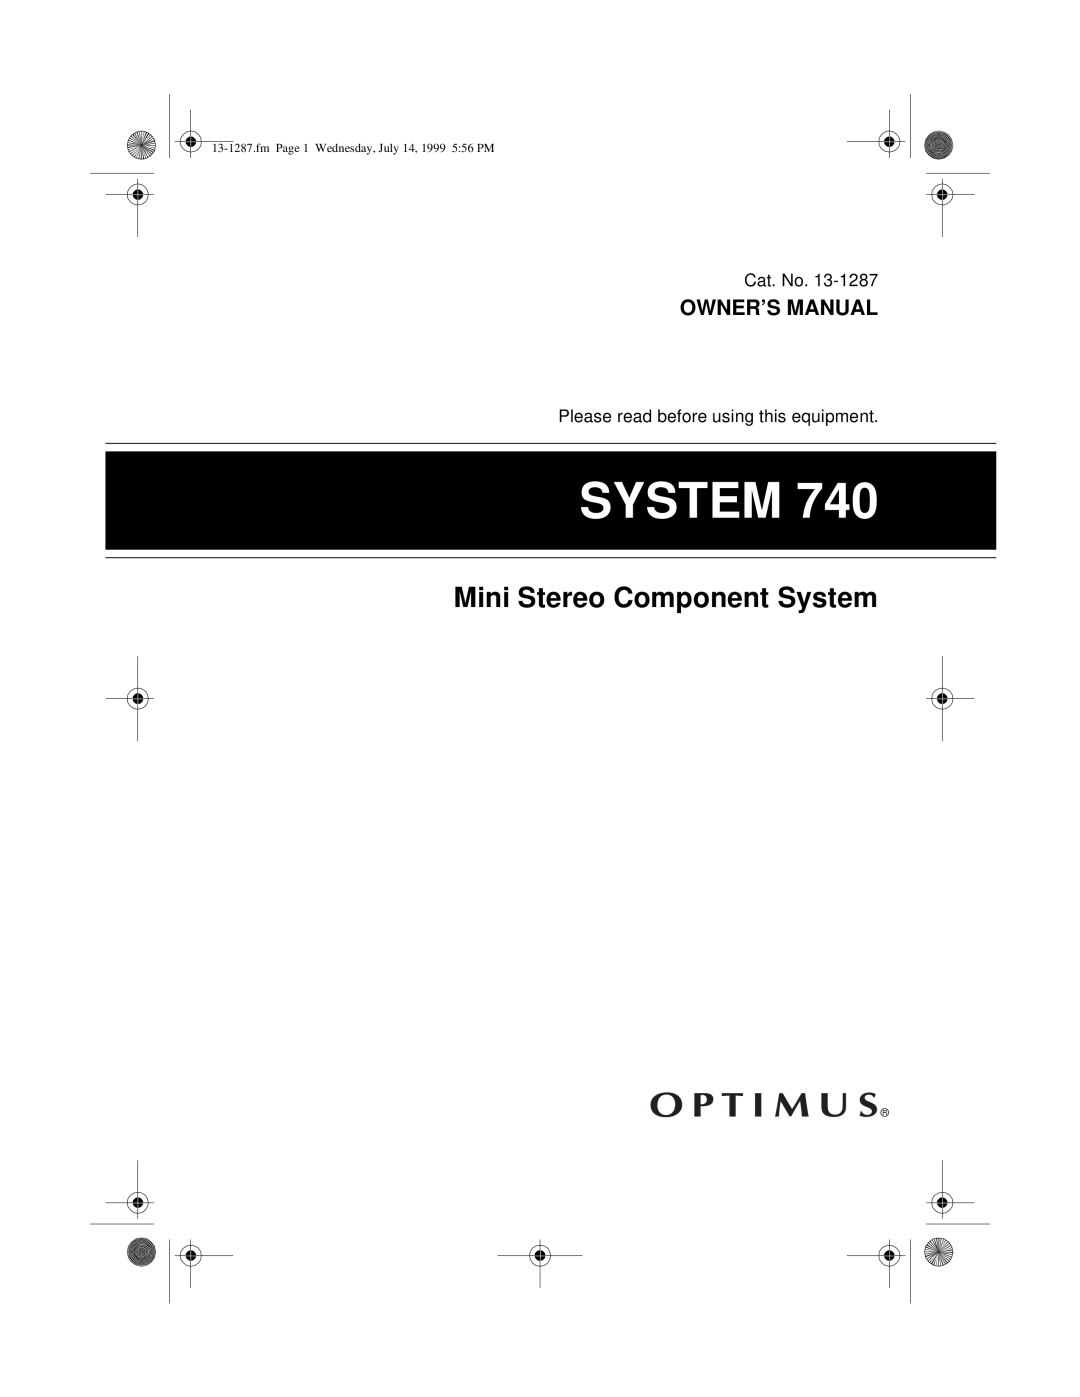 Optimus 740 owner manual Mini Stereo Component System, fmPage 1 Wednesday, July 14, 1999 5 56 PM 